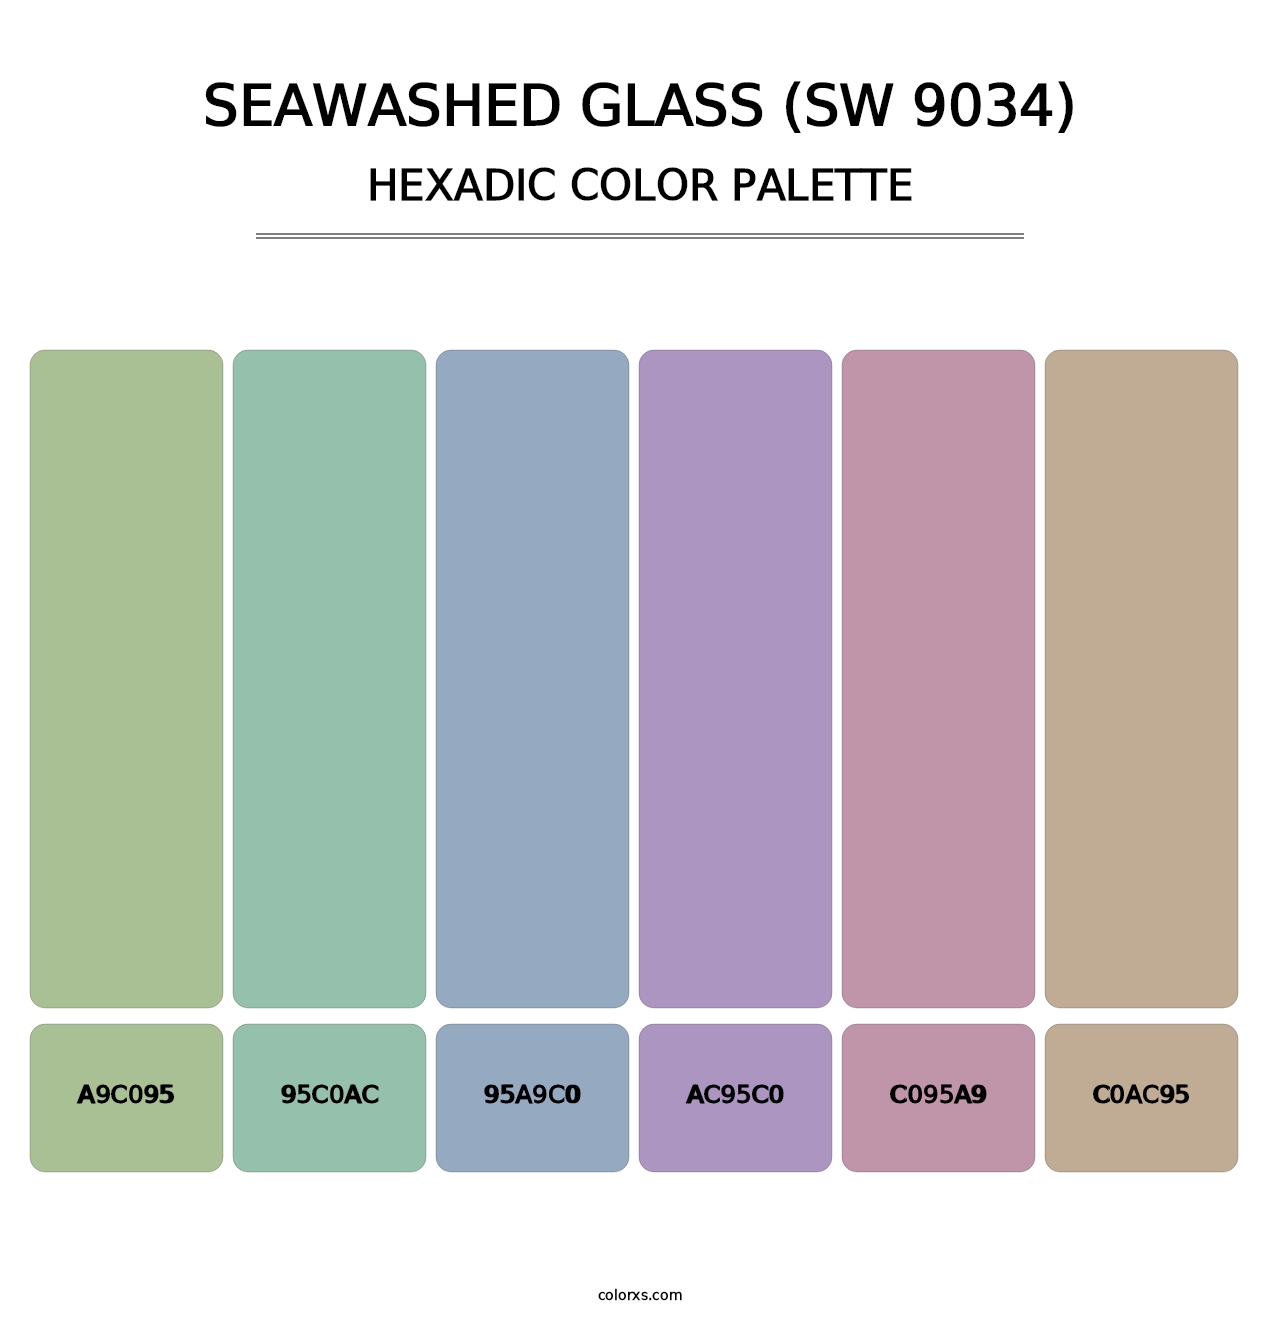 Seawashed Glass (SW 9034) - Hexadic Color Palette